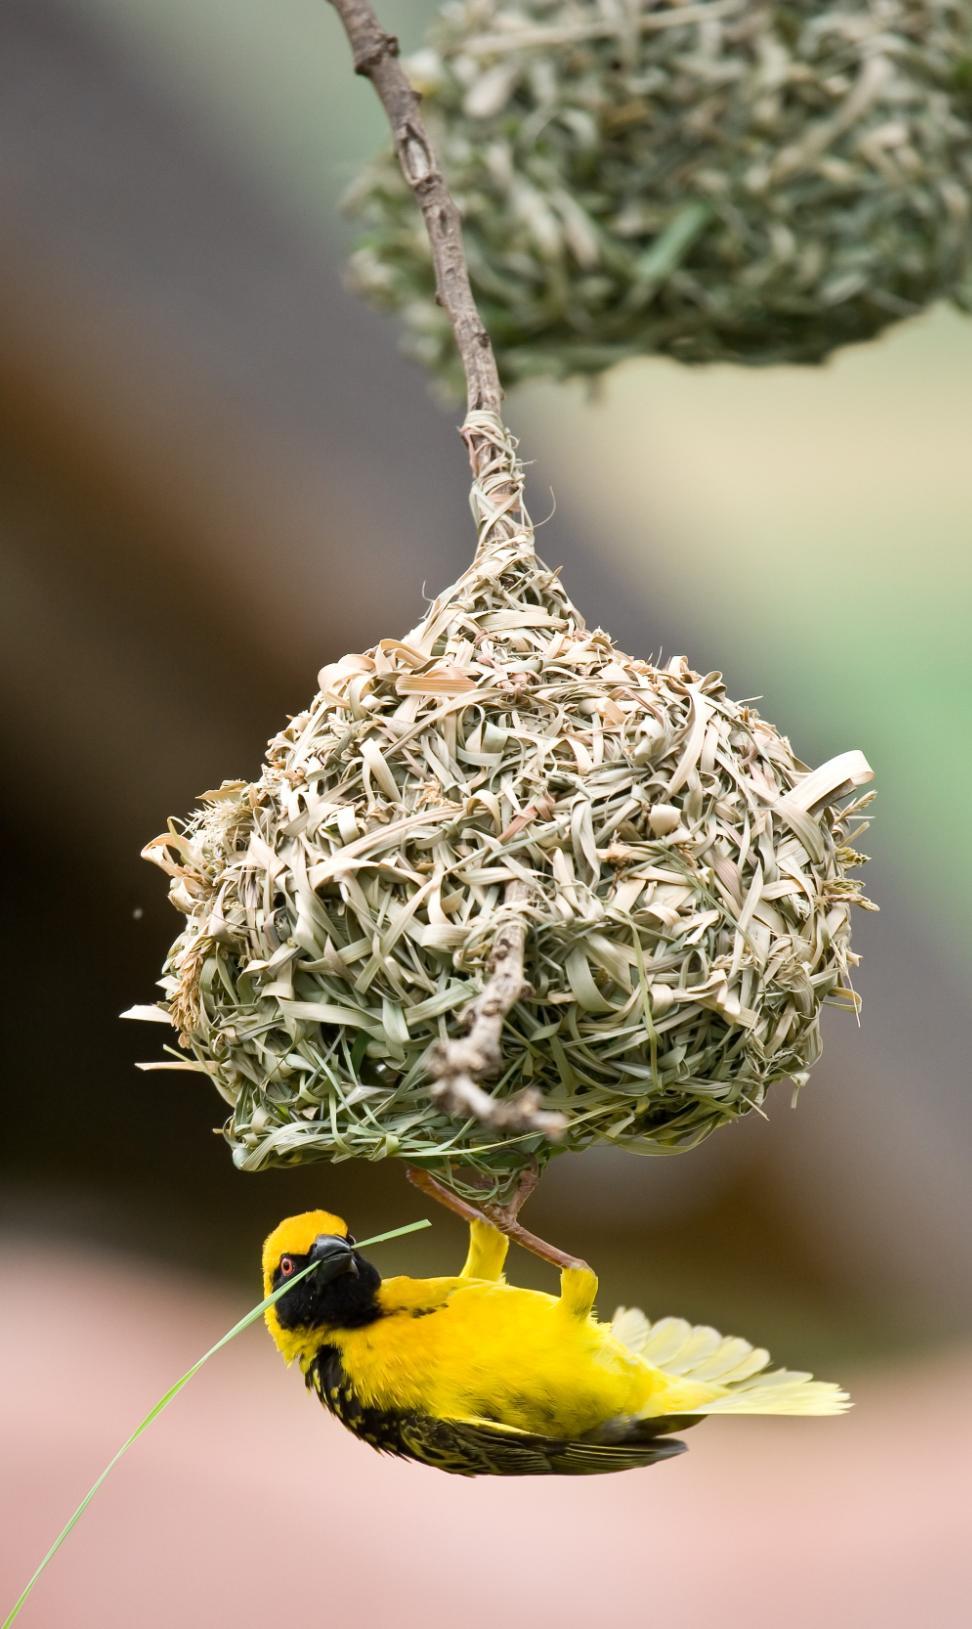 Appendix 1 Weaver bird nests Yes these clever little birds weave strips of leaves and grass into a round ball that is their nest!